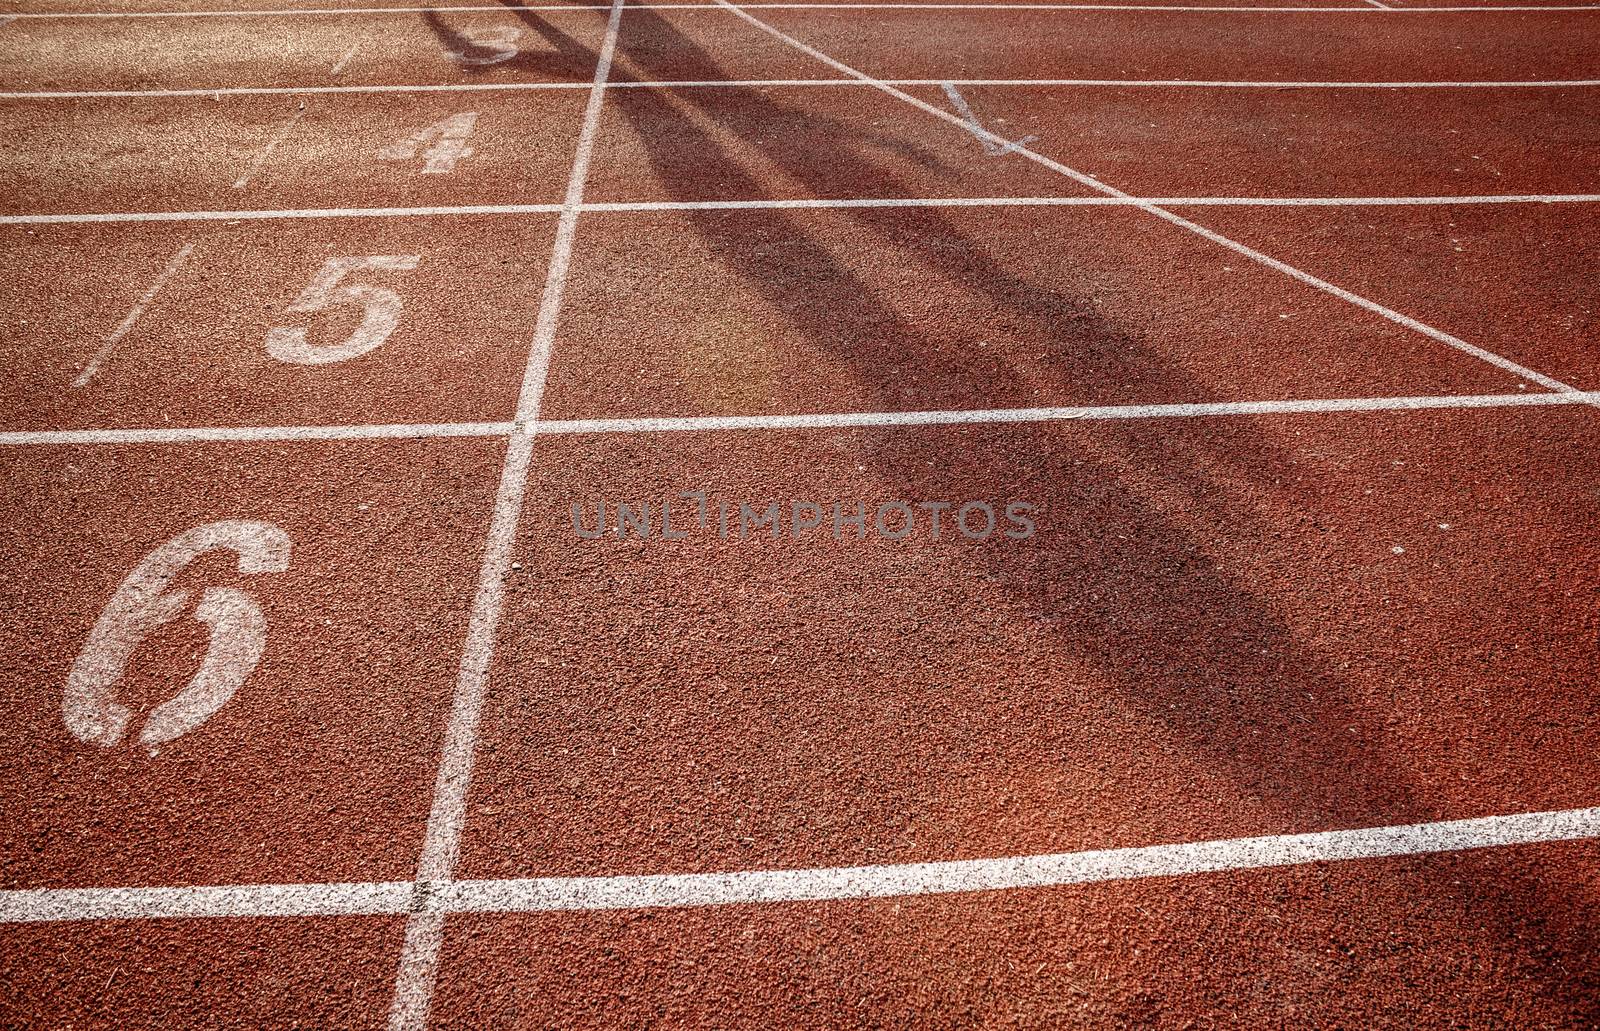 number on running track with shadow